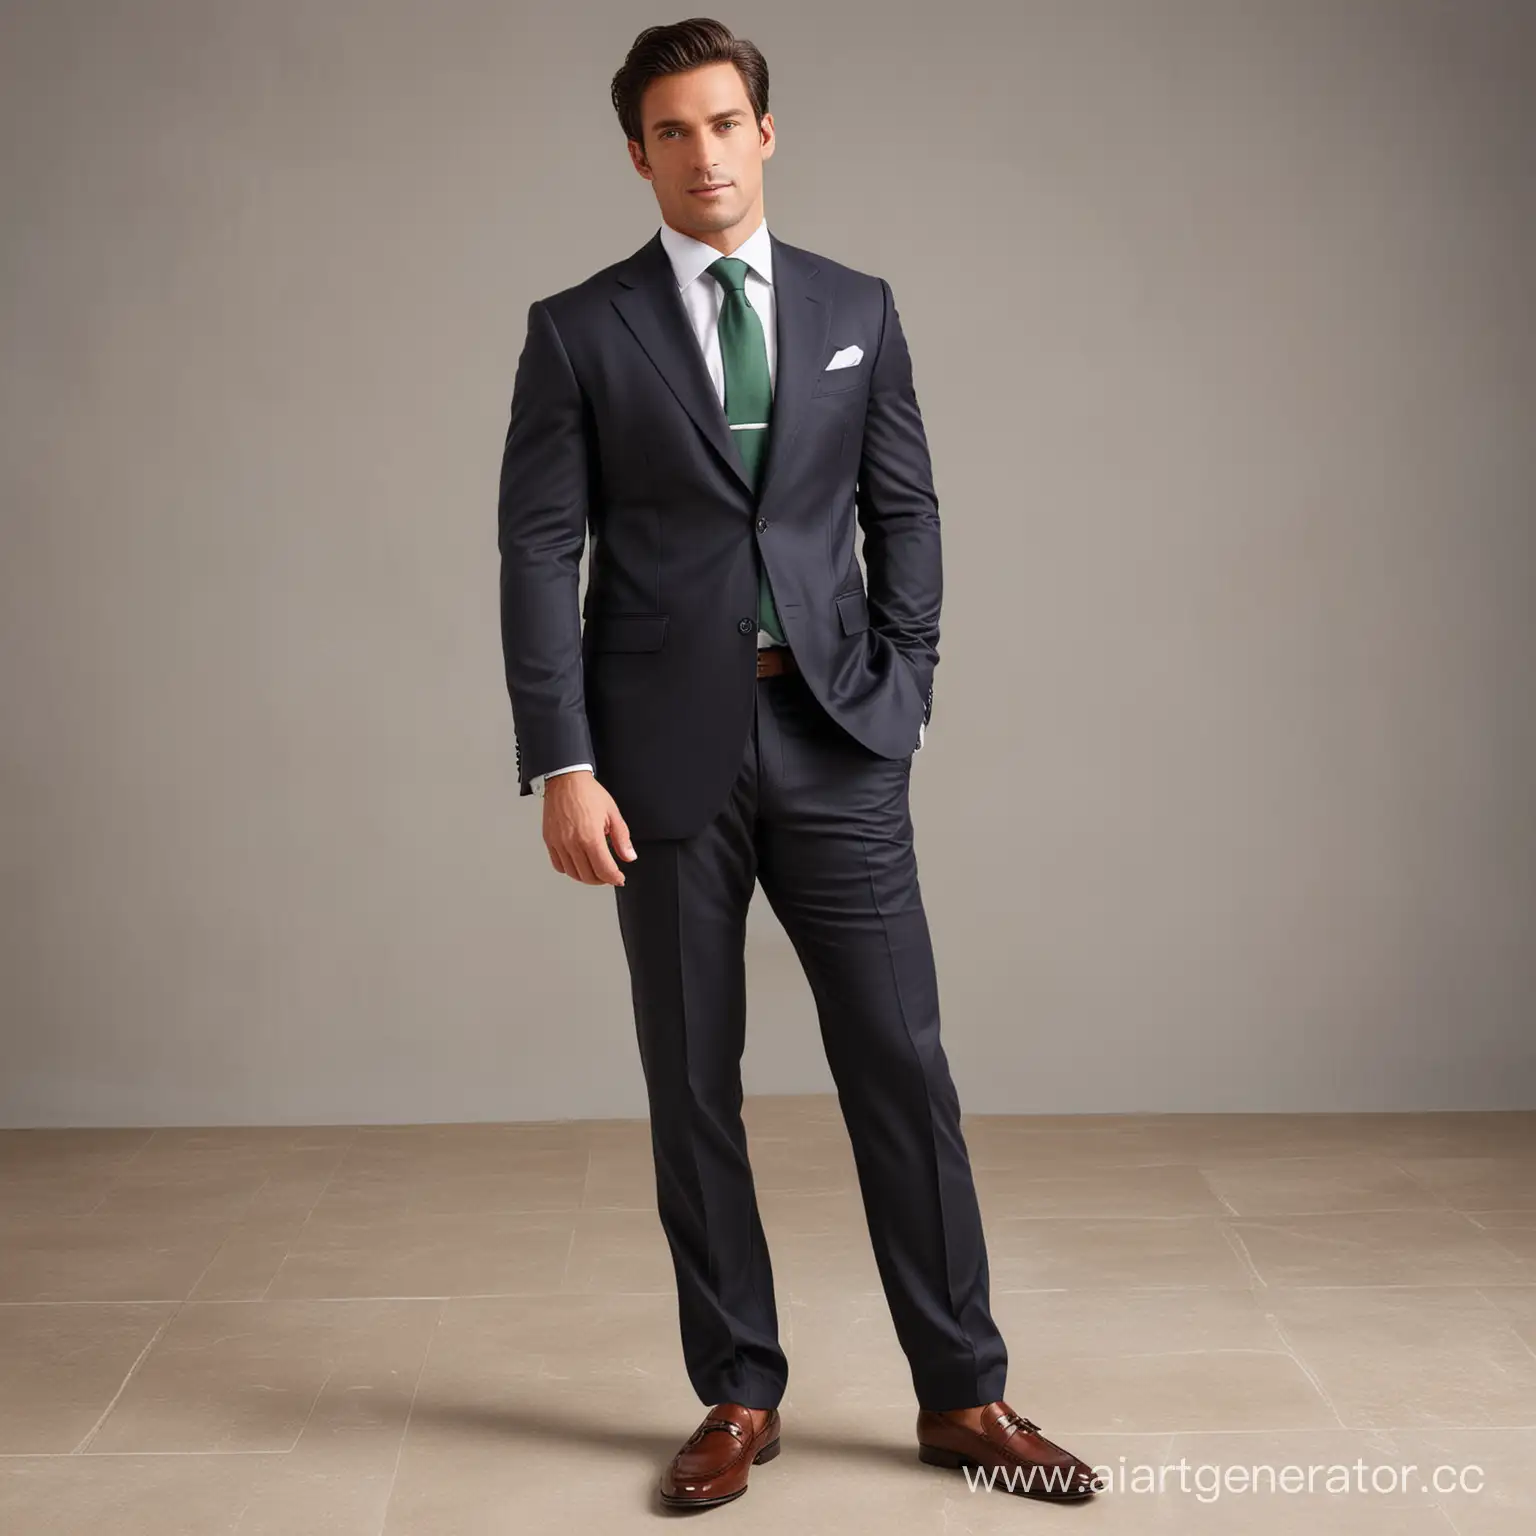 Stylish-Businessman-in-Graphite-Suit-Corporate-Professionals-Balanced-Life